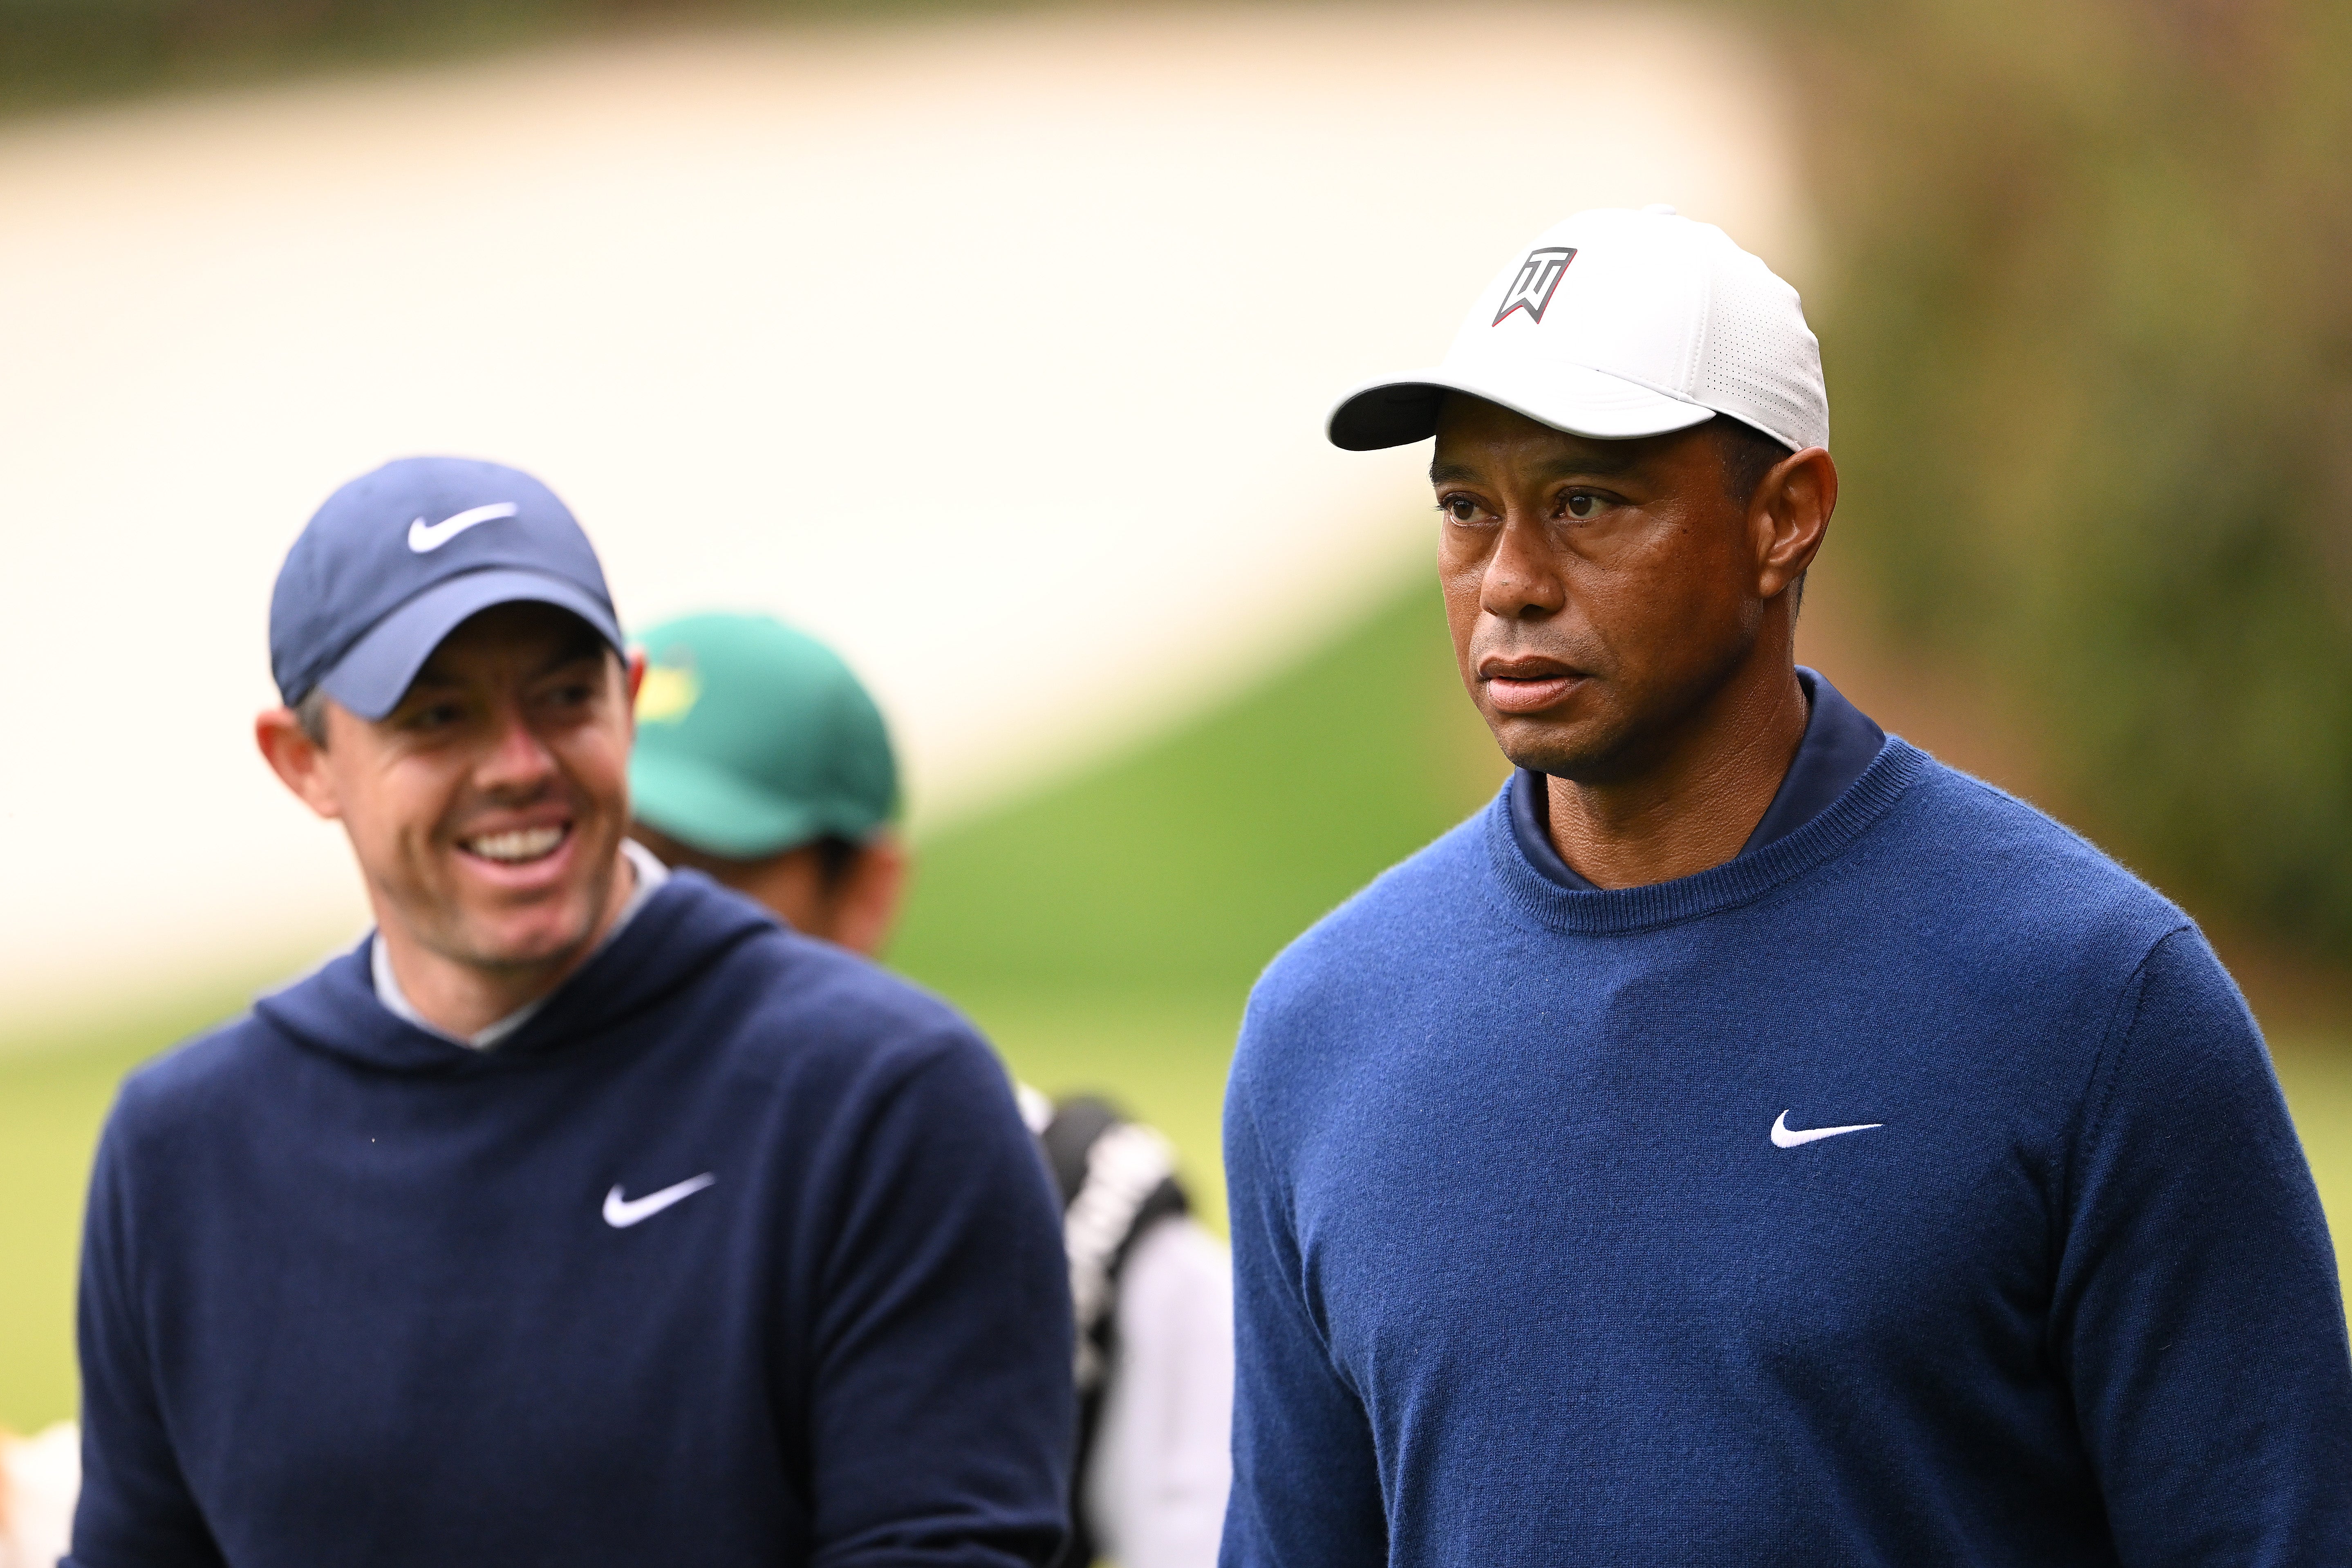 Rory McIlroy will be channelling his inner Tiger Woods to try and finally triumph at Augusta